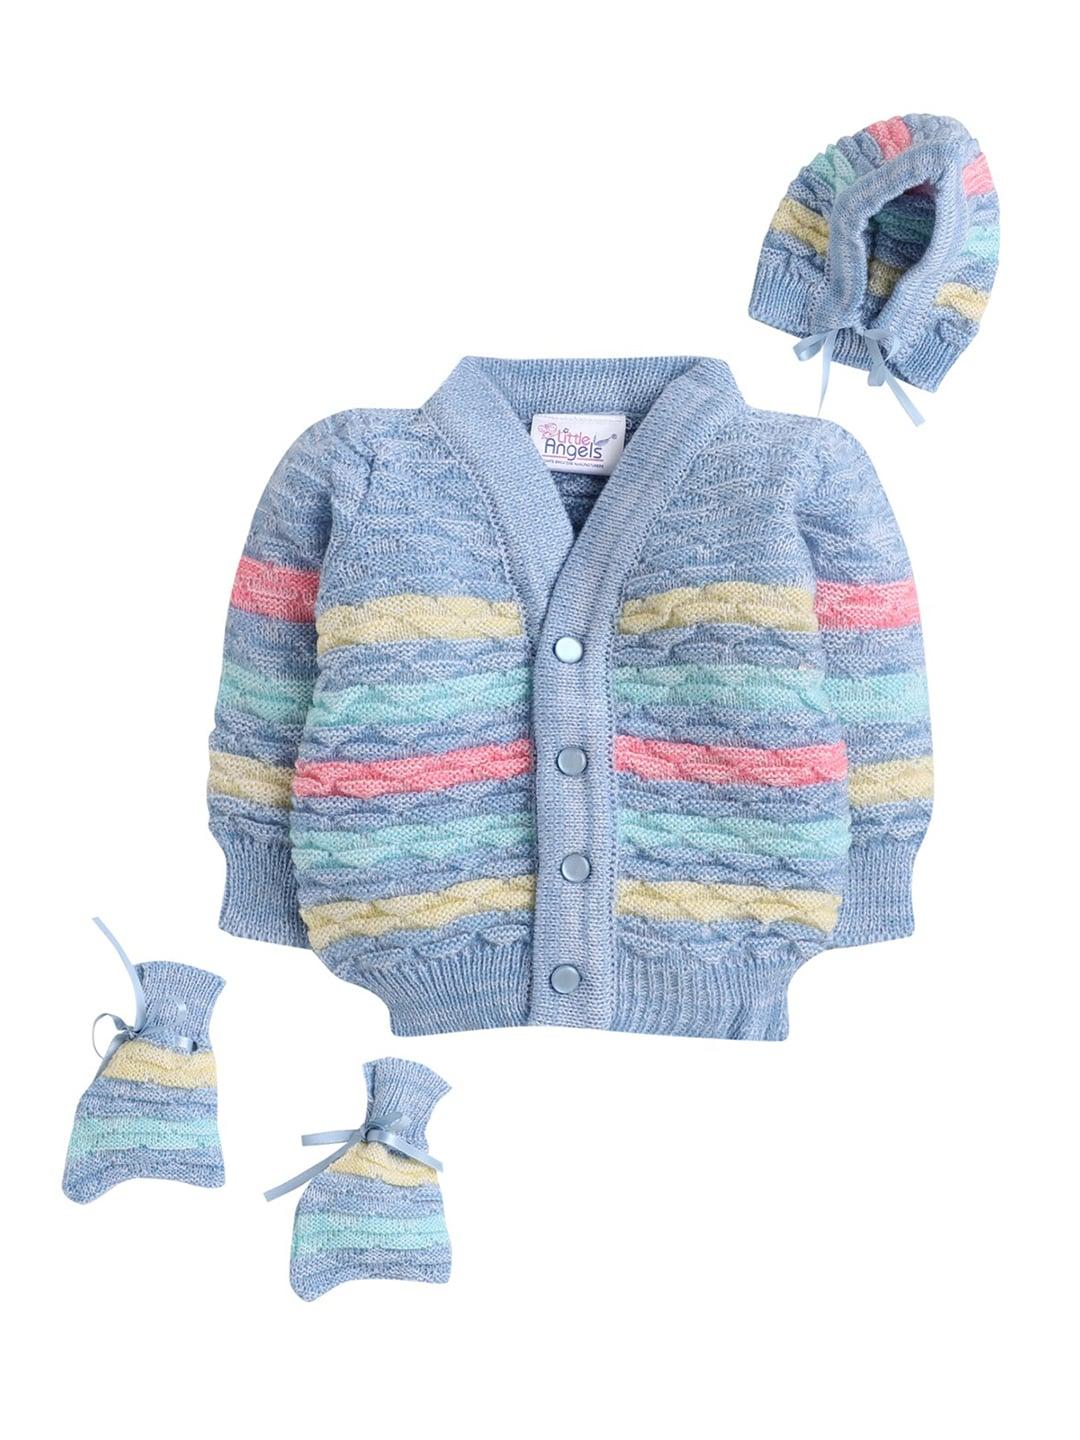 little-angels-boys-blue-&-pink-striped-striped-cardigan-with-matching-cap-and-socks